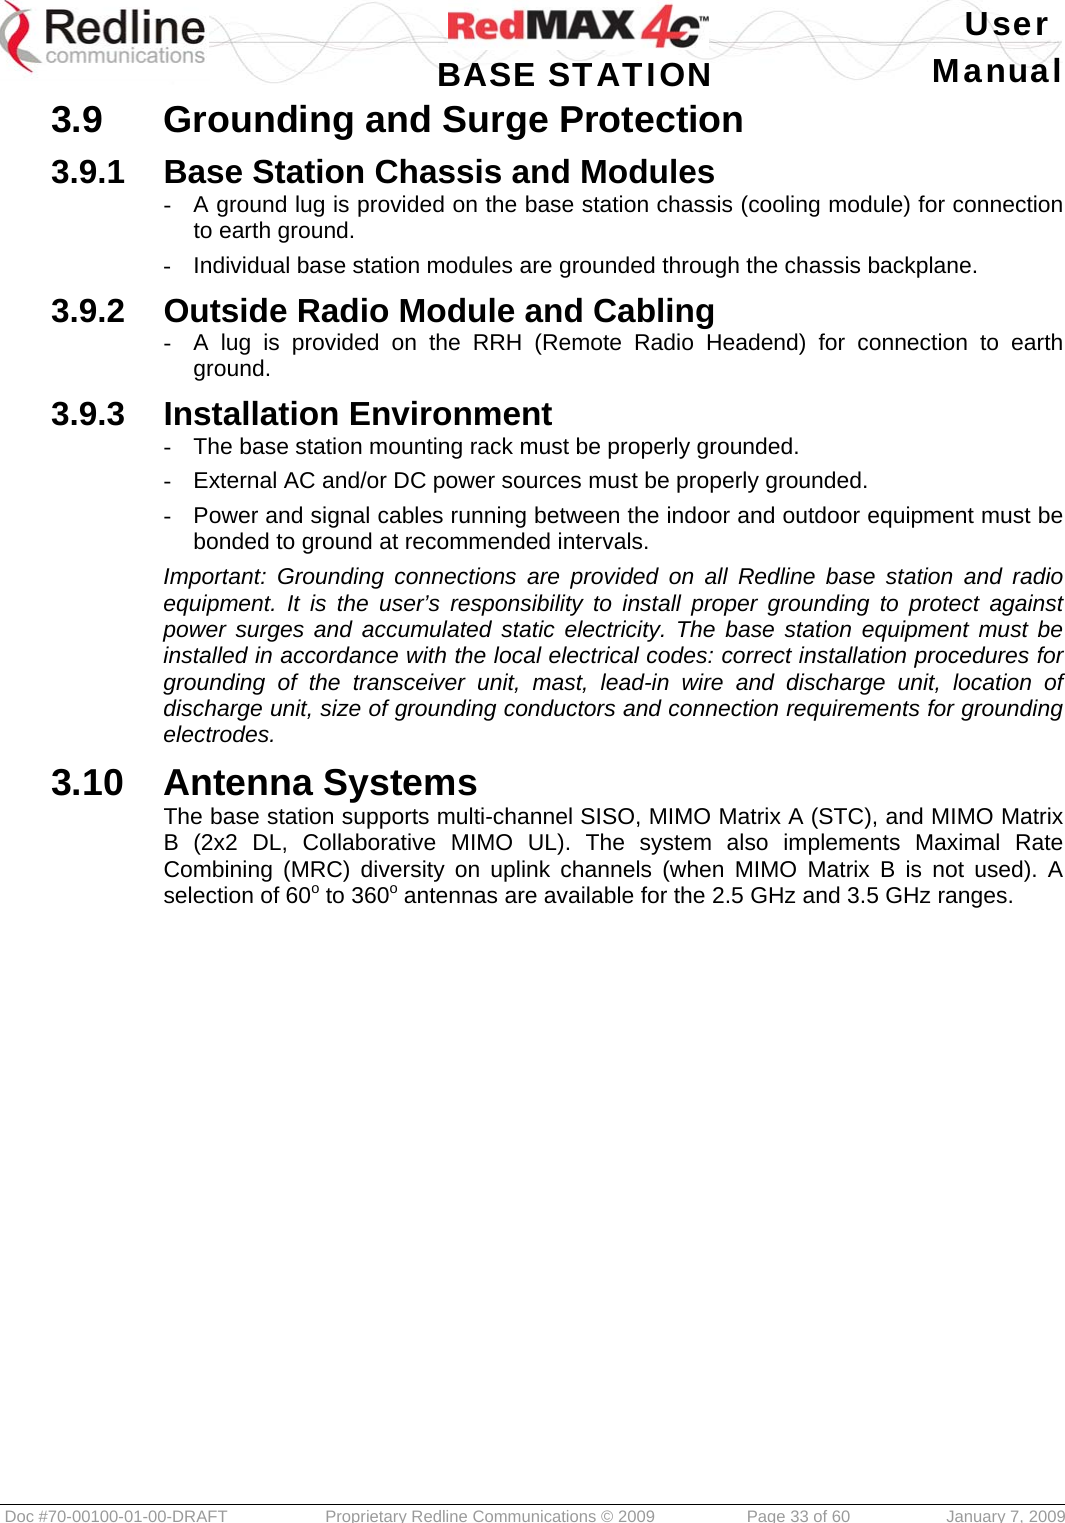   User  BASE STATION Manual  Doc #70-00100-01-00-DRAFT  Proprietary Redline Communications © 2009   Page 33 of 60  January 7, 2009 3.9  Grounding and Surge Protection 3.9.1  Base Station Chassis and Modules -  A ground lug is provided on the base station chassis (cooling module) for connection to earth ground. -  Individual base station modules are grounded through the chassis backplane. 3.9.2  Outside Radio Module and Cabling -  A lug is provided on the RRH (Remote Radio Headend) for connection to earth ground. 3.9.3  Installation Environment -  The base station mounting rack must be properly grounded. -  External AC and/or DC power sources must be properly grounded. -  Power and signal cables running between the indoor and outdoor equipment must be bonded to ground at recommended intervals. Important: Grounding connections are provided on all Redline base station and radio equipment. It is the user’s responsibility to install proper grounding to protect against power surges and accumulated static electricity. The base station equipment must be installed in accordance with the local electrical codes: correct installation procedures for grounding of the transceiver unit, mast, lead-in wire and discharge unit, location of discharge unit, size of grounding conductors and connection requirements for grounding electrodes. 3.10  Antenna Systems The base station supports multi-channel SISO, MIMO Matrix A (STC), and MIMO Matrix B (2x2 DL, Collaborative MIMO UL). The system also implements Maximal Rate Combining (MRC) diversity on uplink channels (when MIMO Matrix B is not used). A selection of 60o to 360o antennas are available for the 2.5 GHz and 3.5 GHz ranges.   